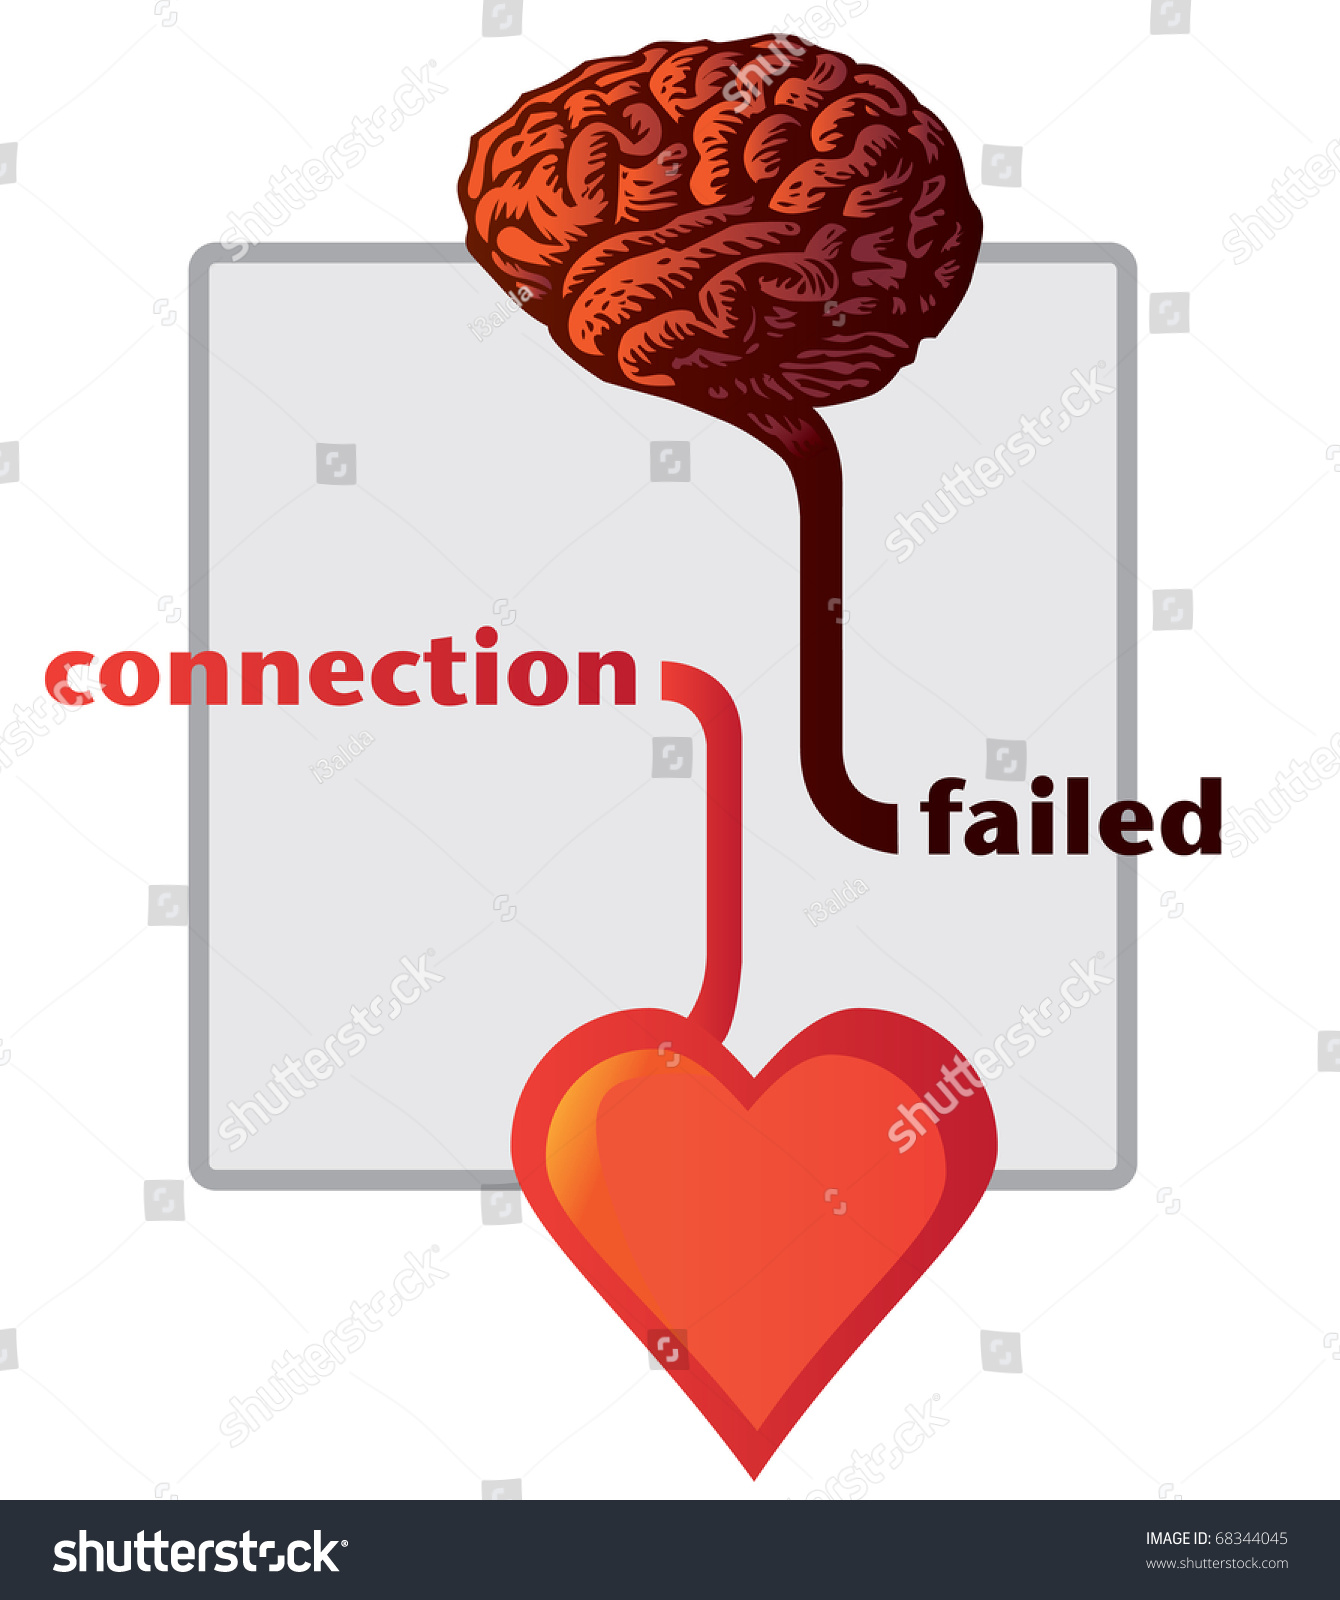 Image result for connection between heart and brain